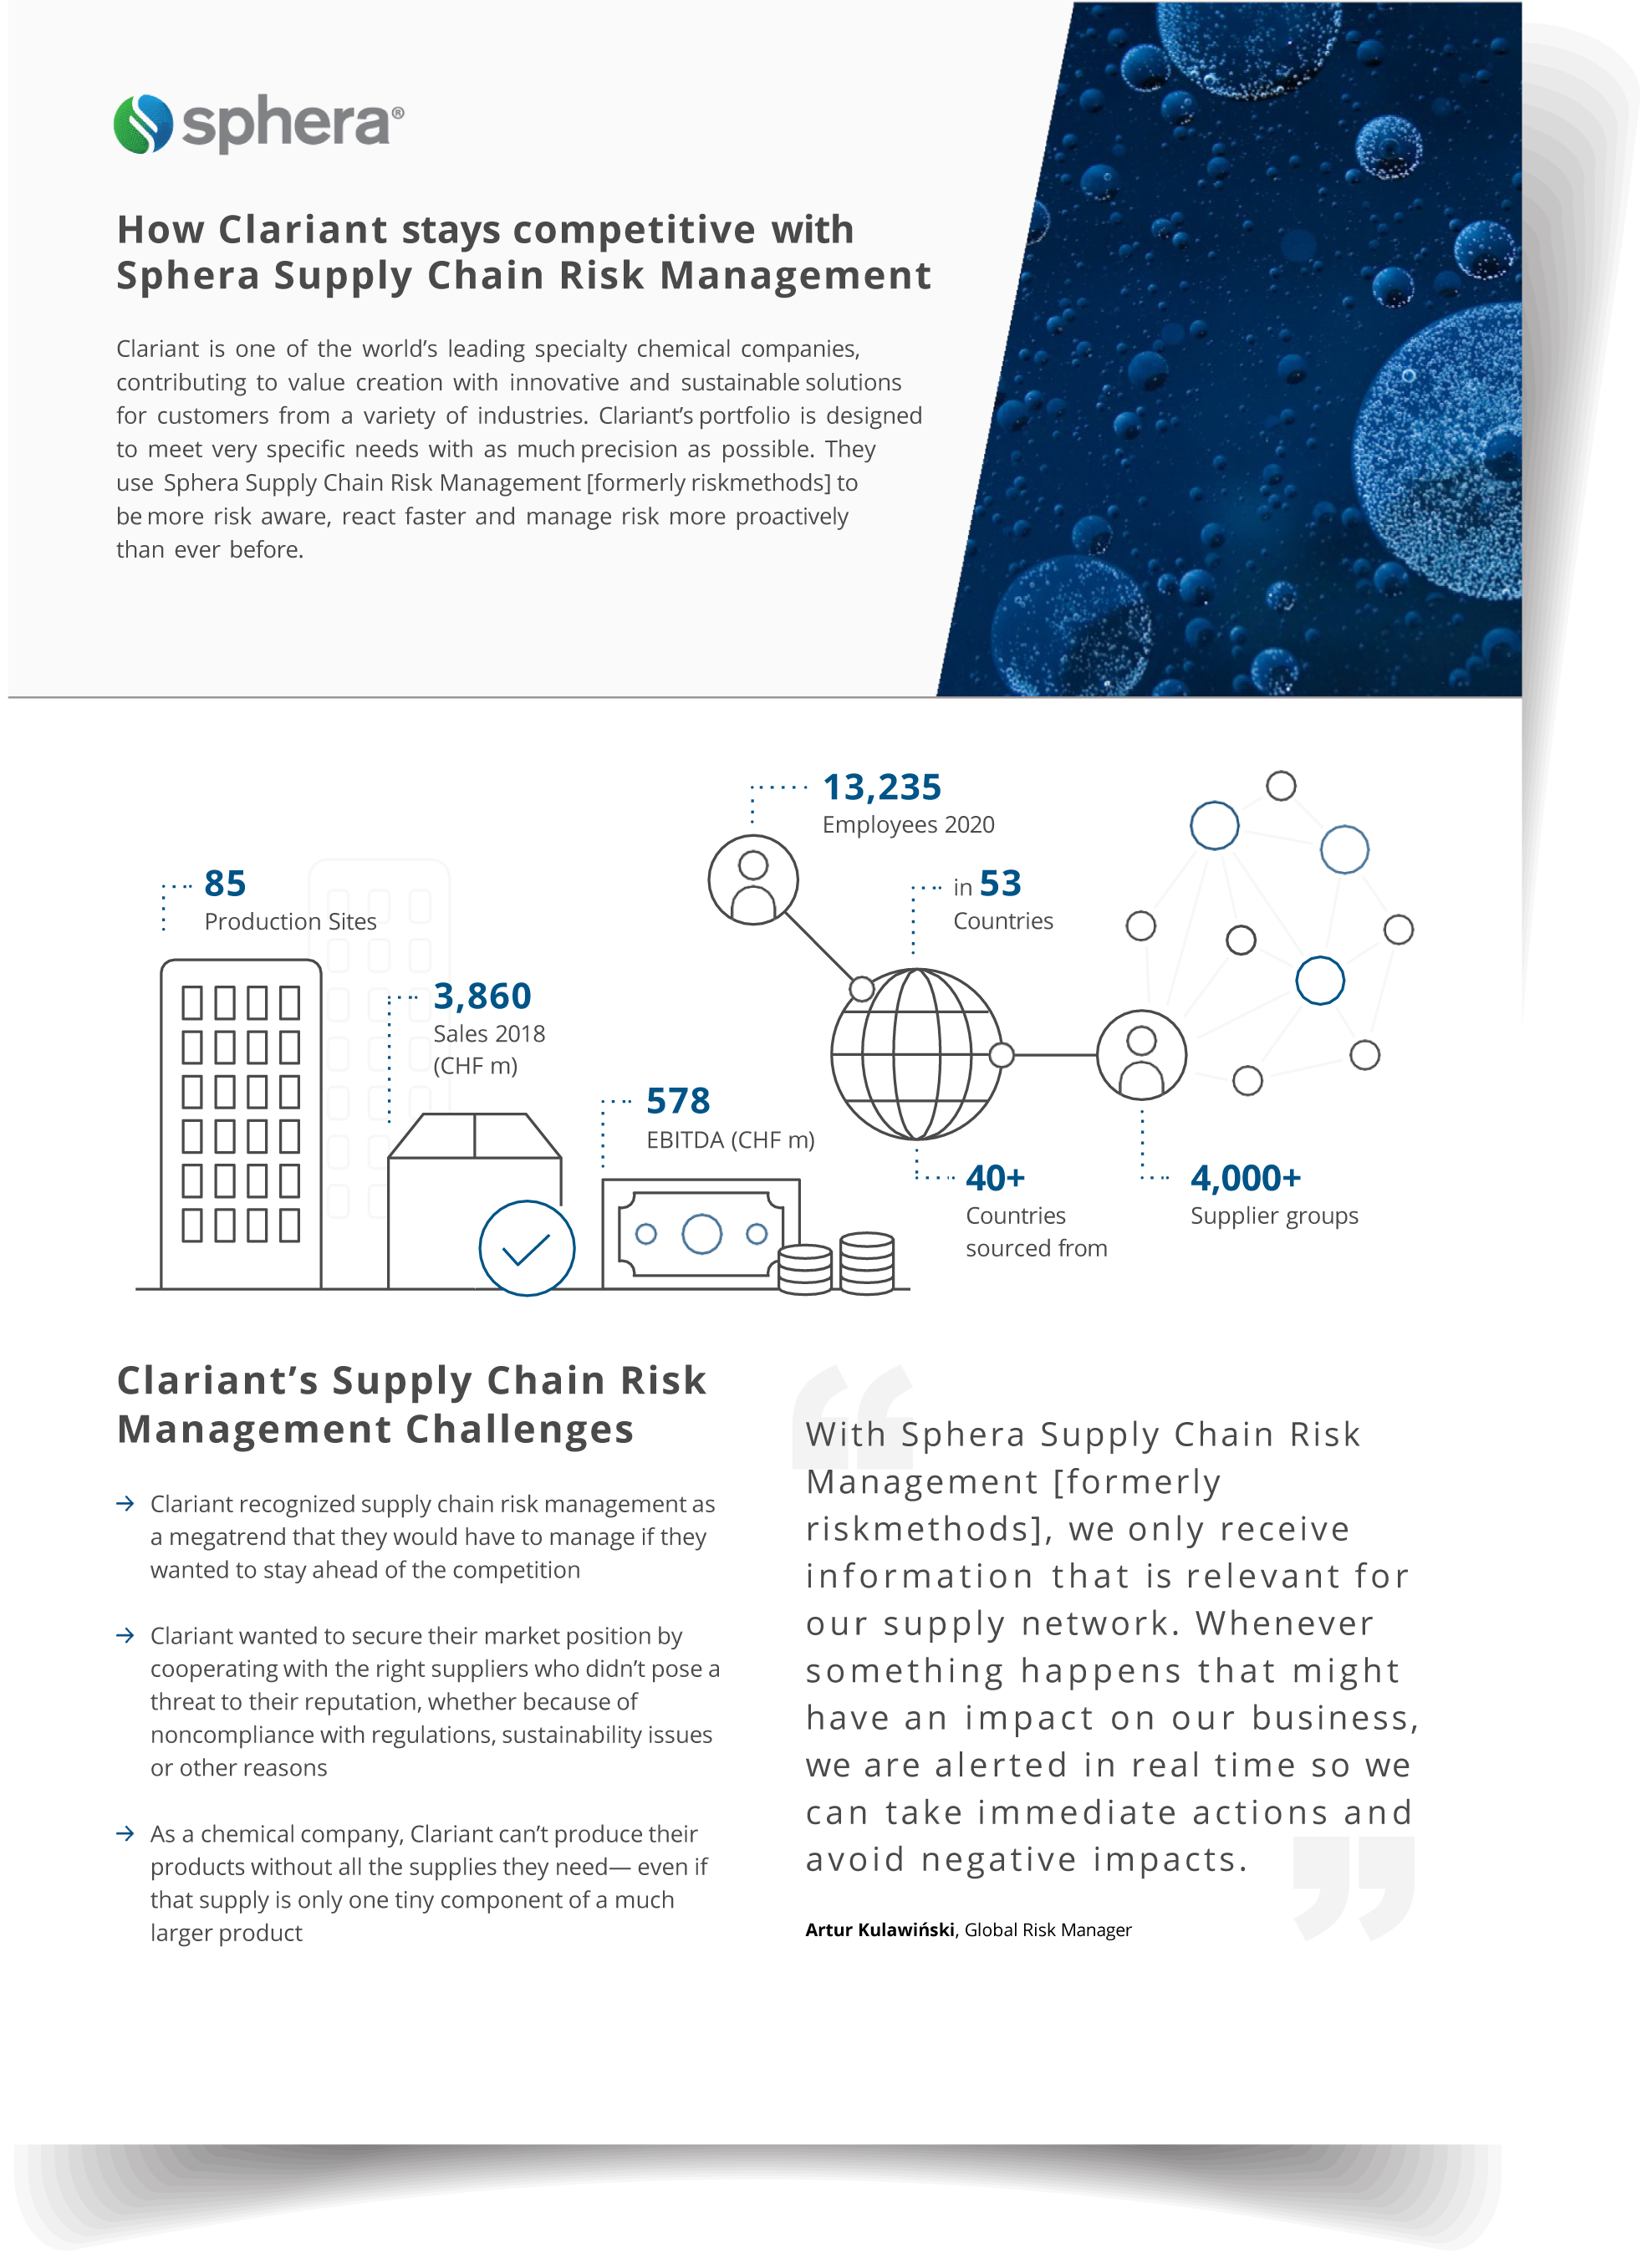 How Clariant Stays Competitive with Sphera Supply Chain Risk Management